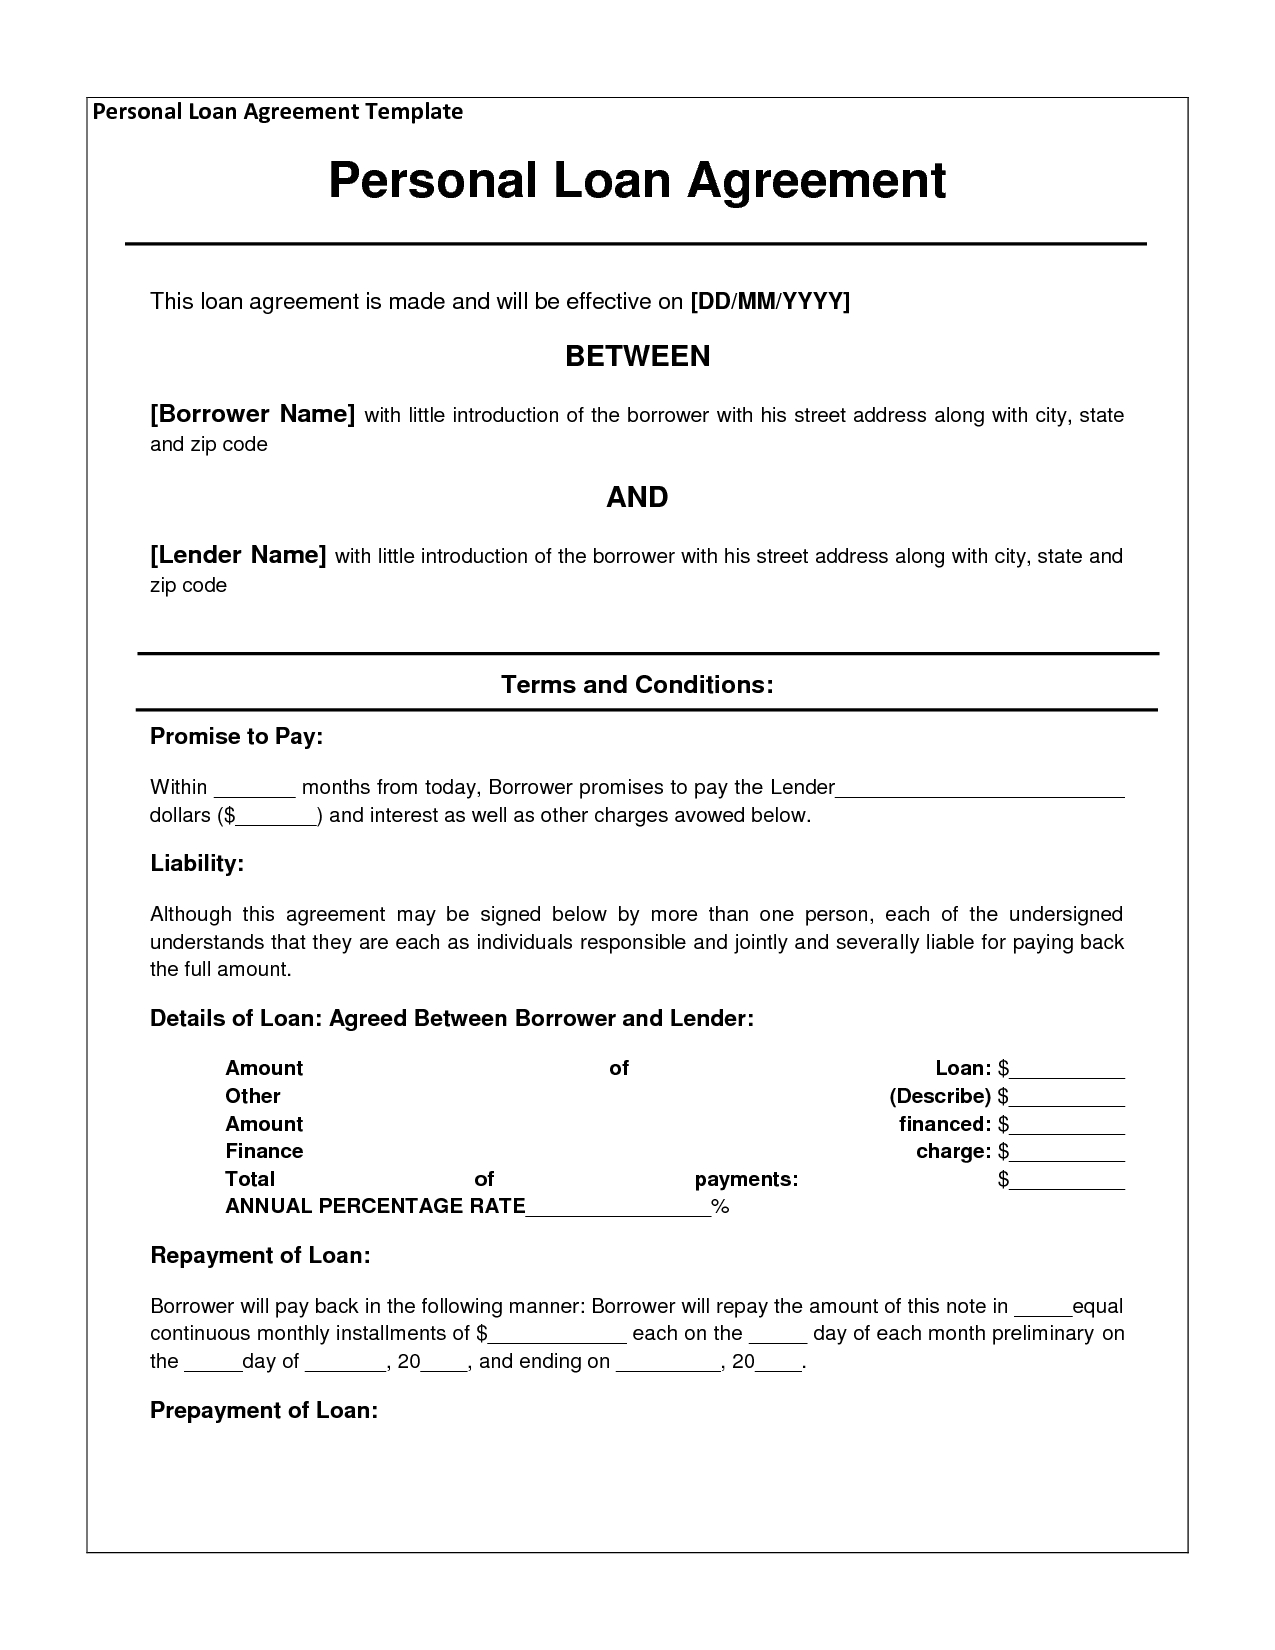 Personal Loan Letter Template - Free Personal Loan Agreement form Template $1000 Approved In 2